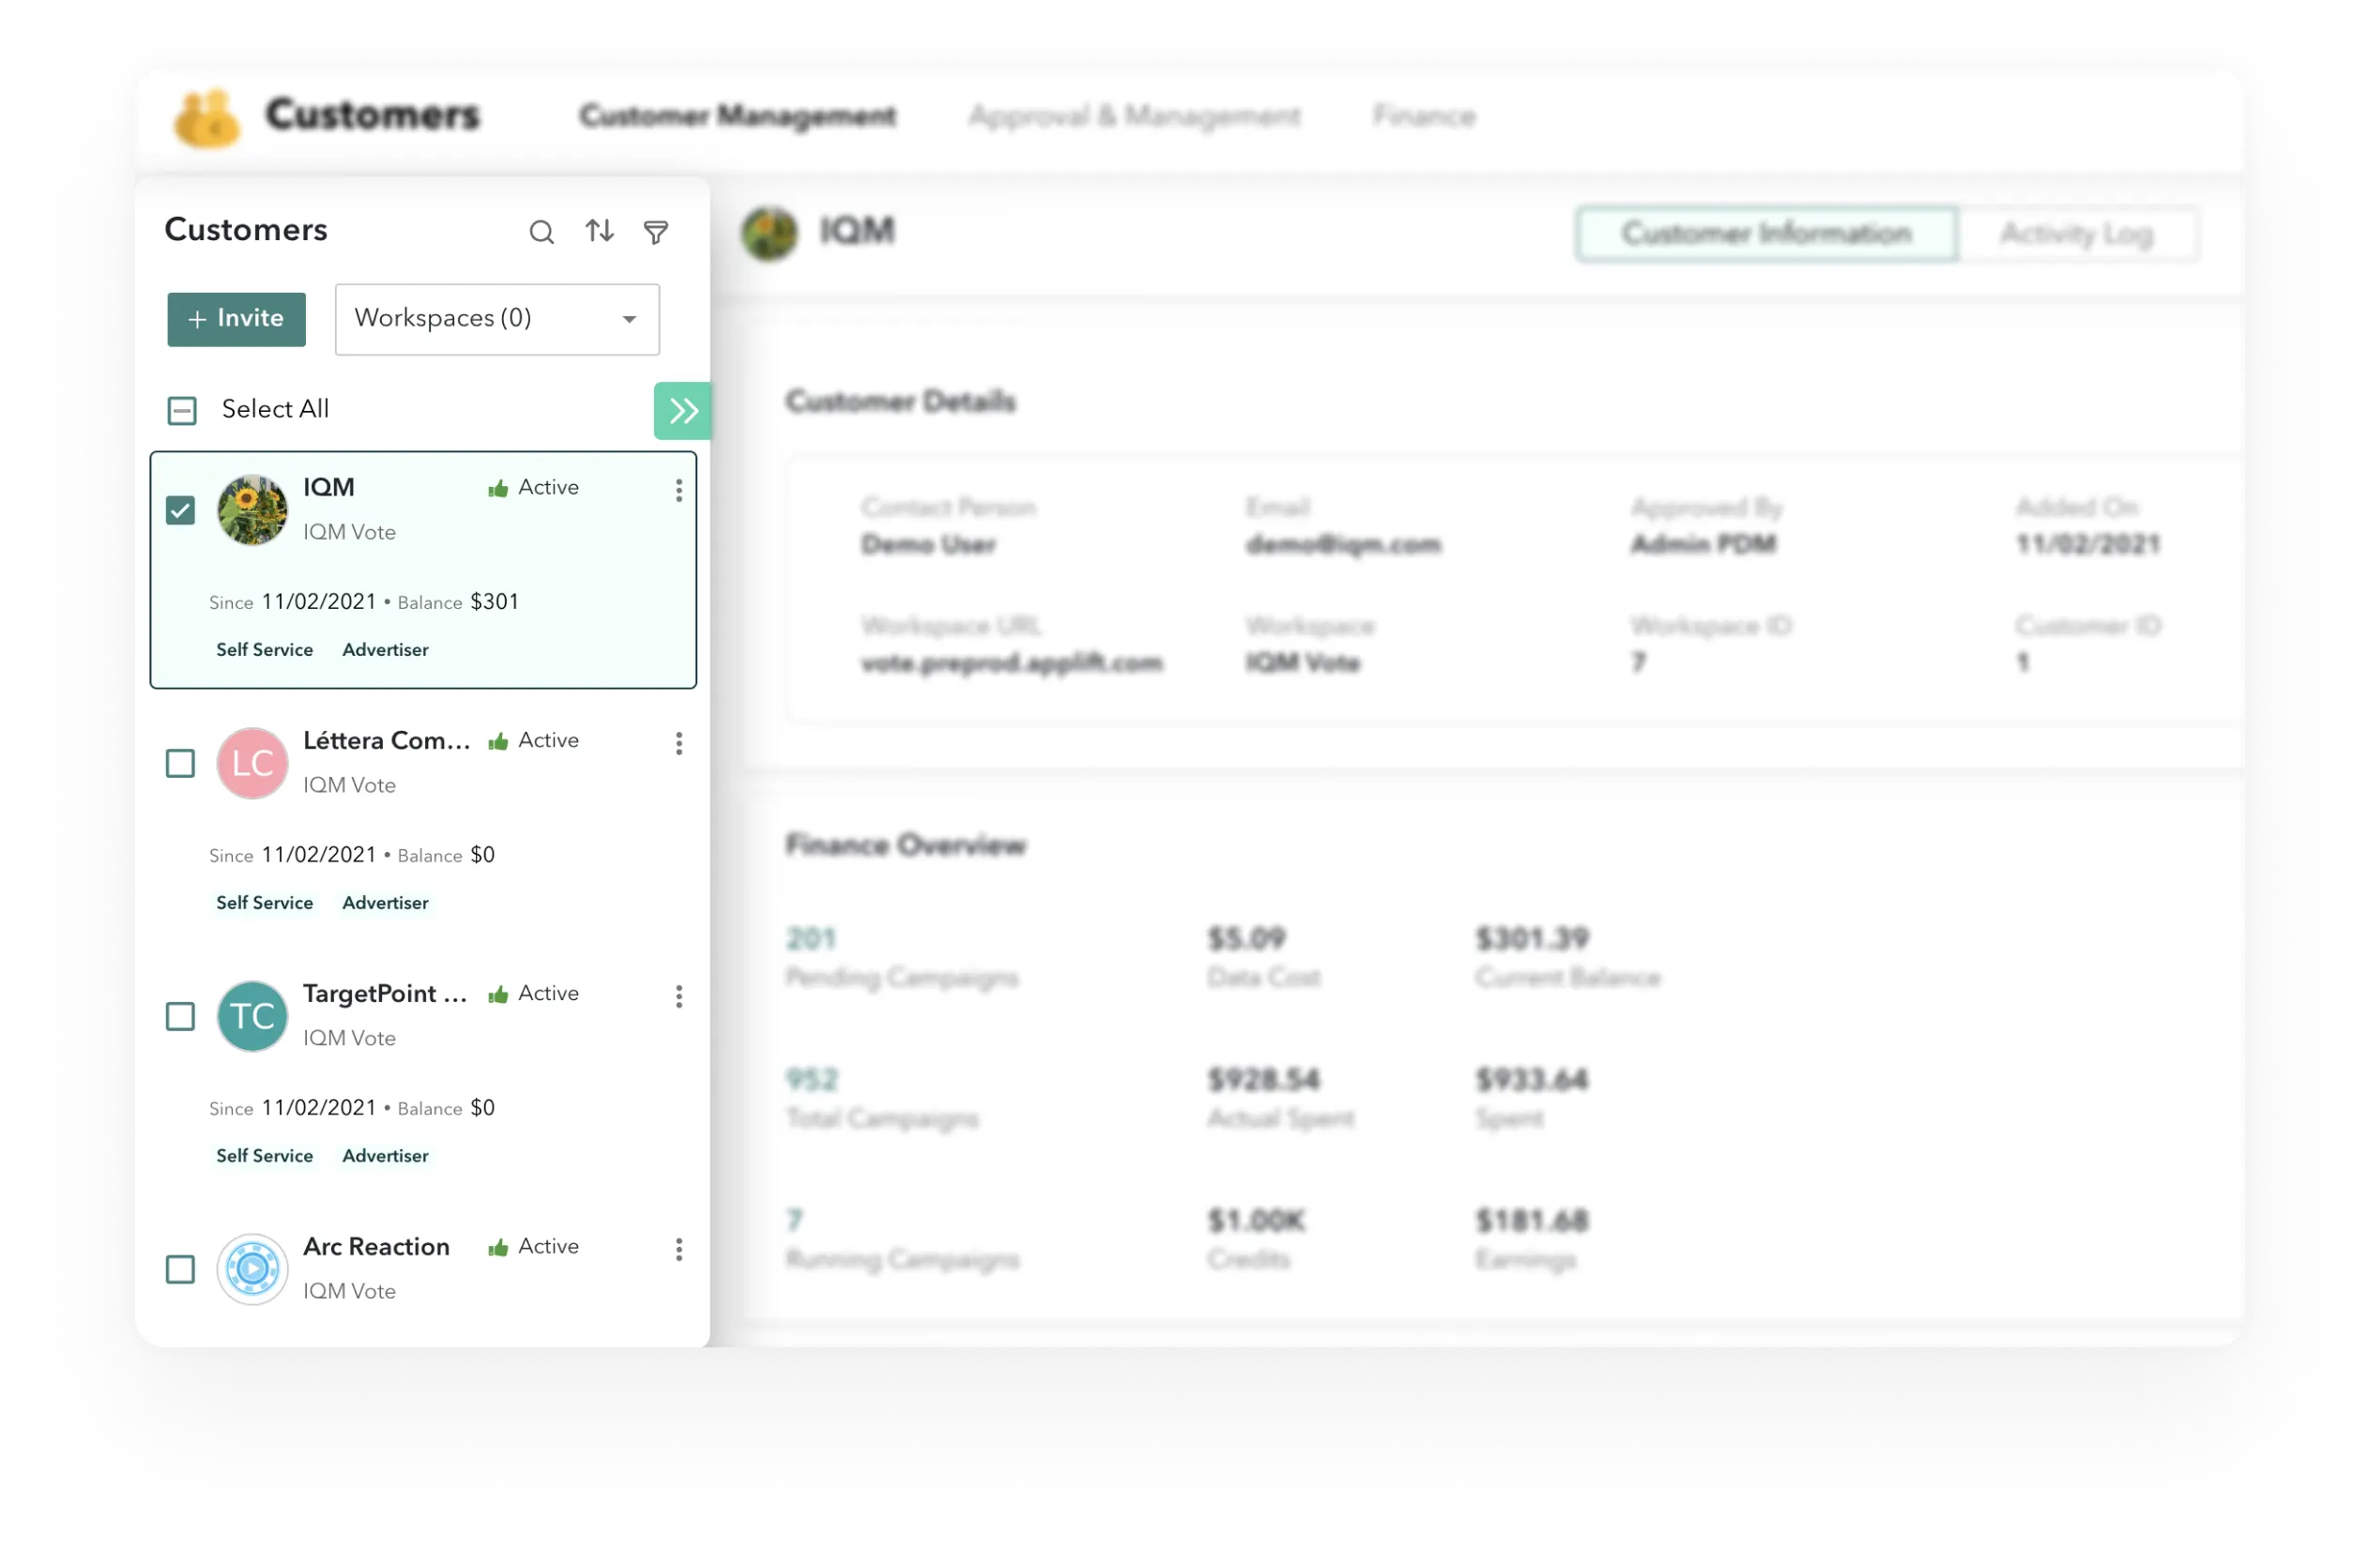 Manage Customer Accounts with ease